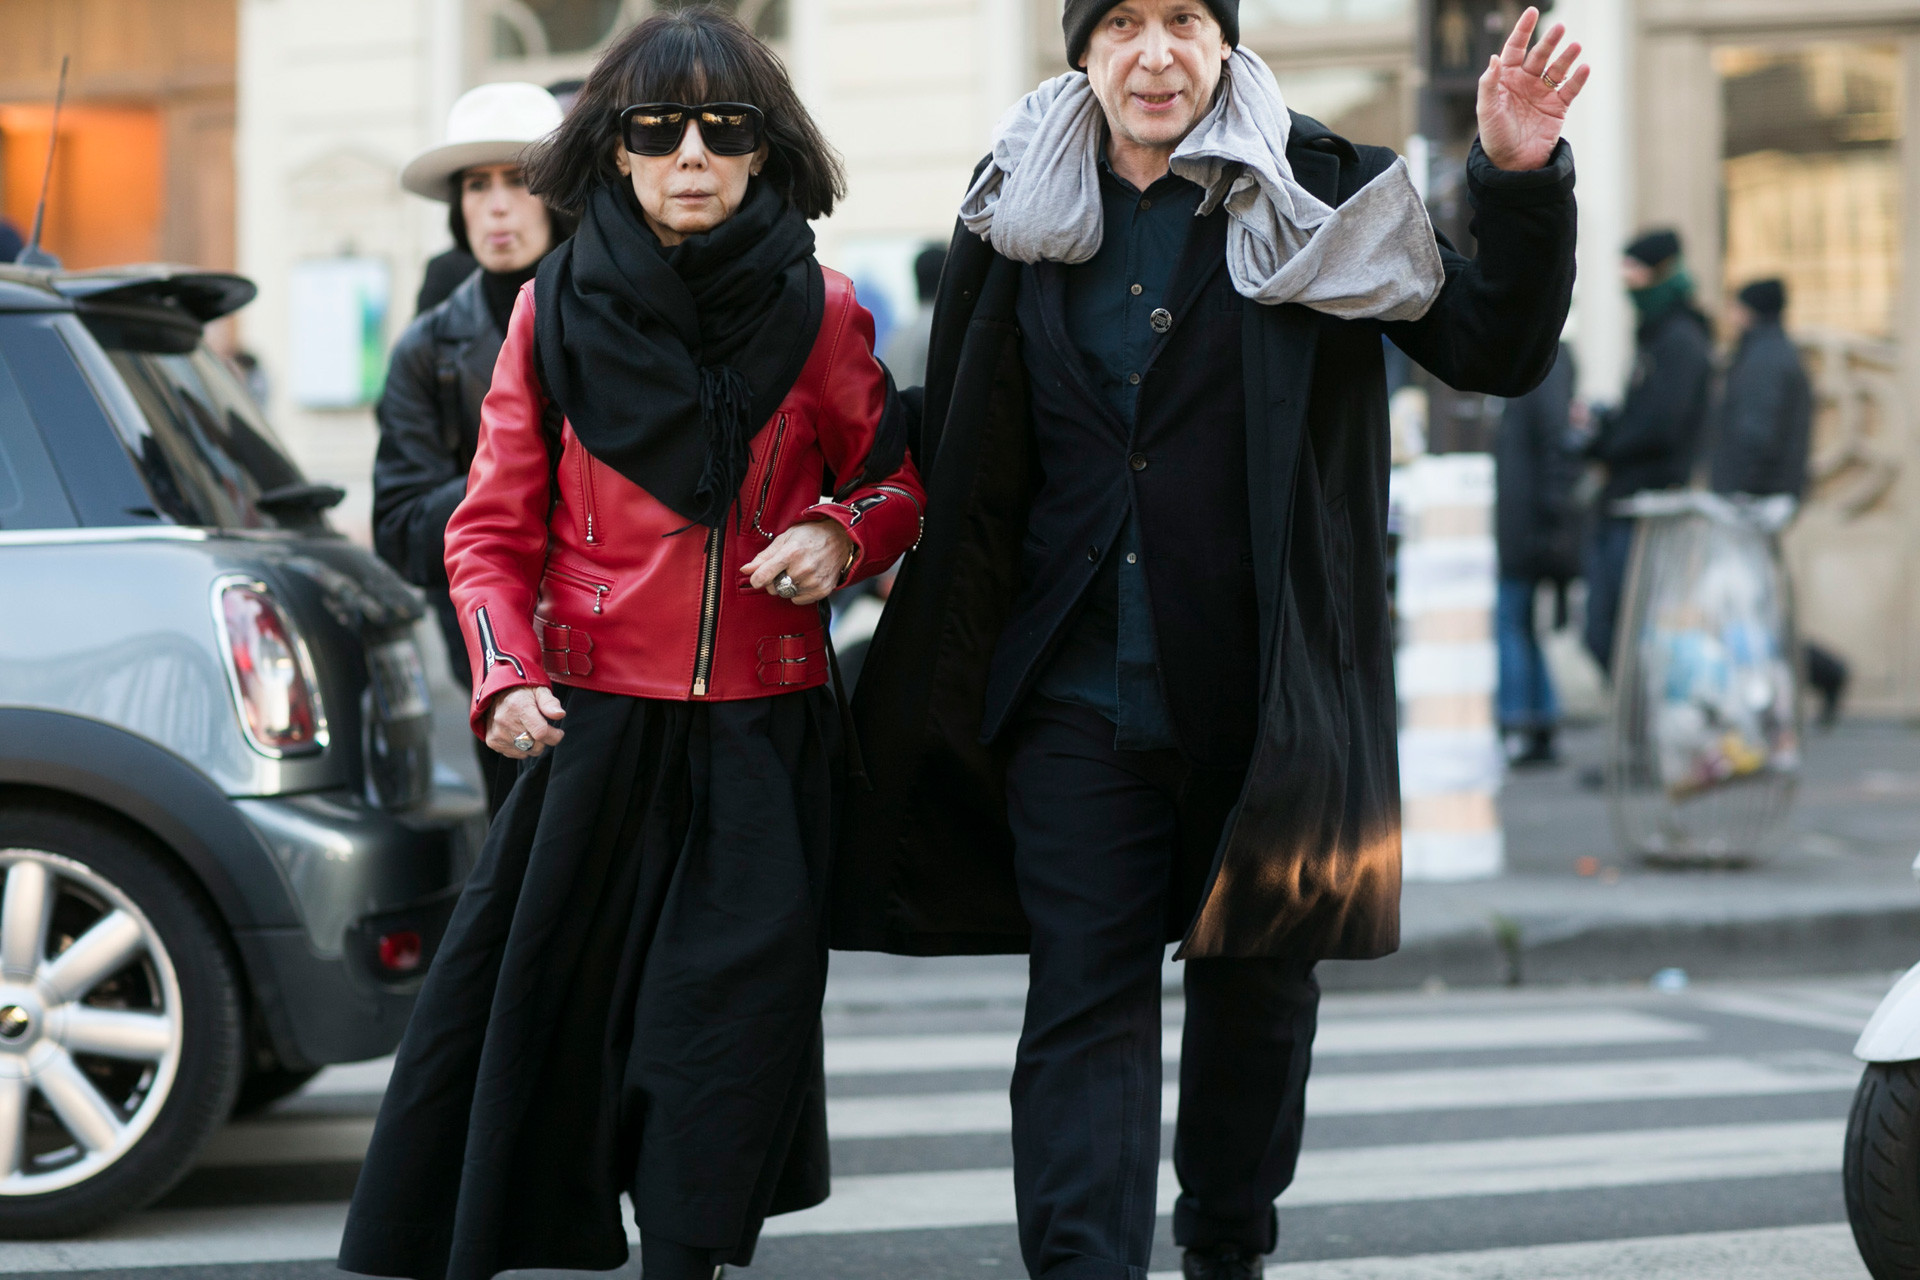 Rei Kawakubo, Comme des Garcons creative director, and Adrian Joffe, Dover Street Market and Comme des Garcons presiden, exit the Gosha Rubchinskiy show on Jan. 21, 2016 in Paris, France. 